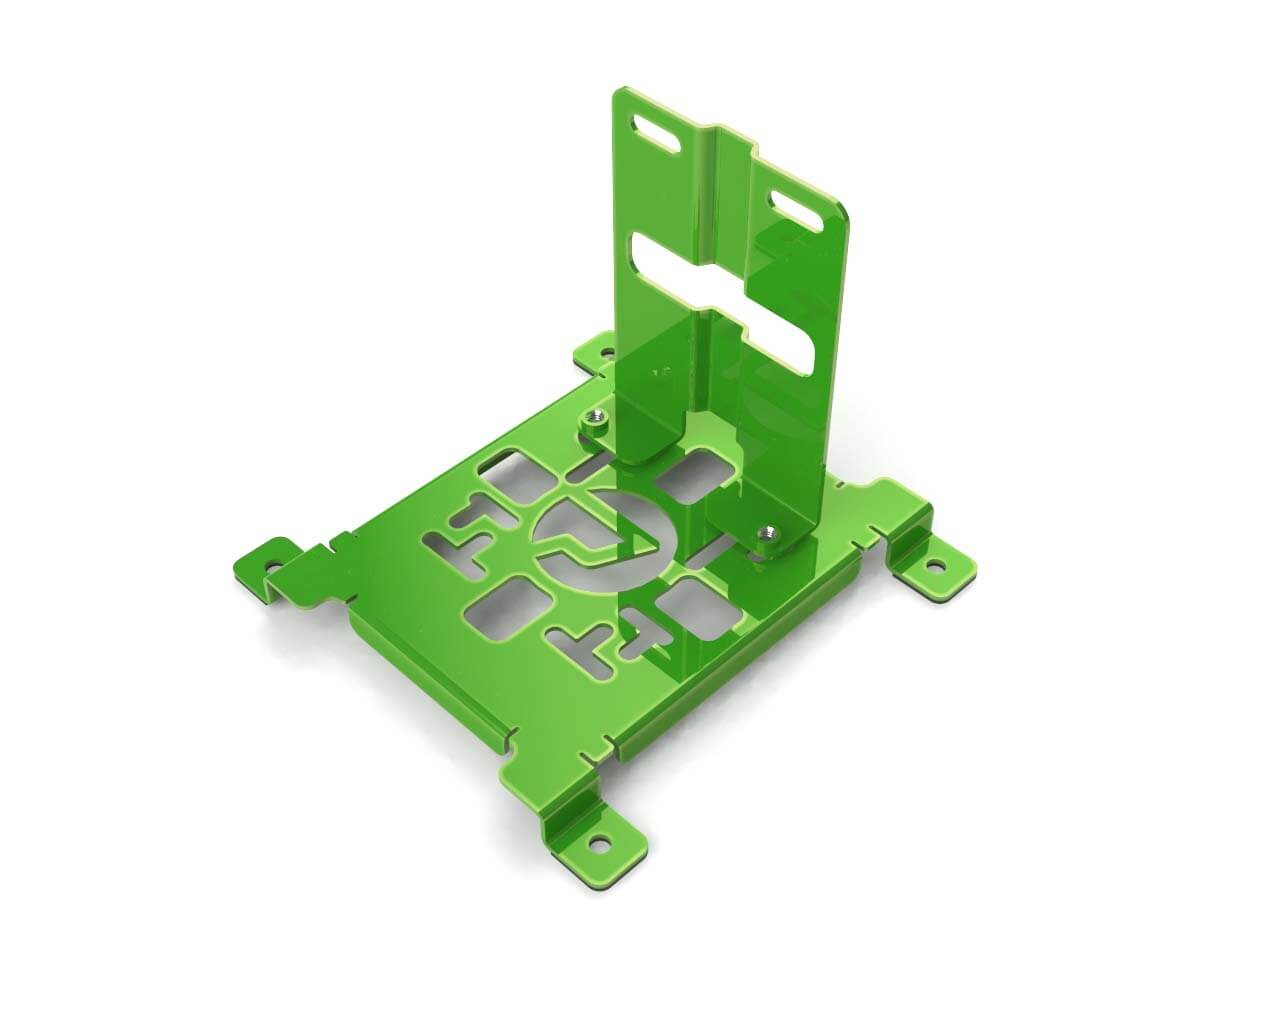 PrimoChill SX CTR2 Spider Mount Bracket Kit - 120mm Series - PrimoChill - KEEPING IT COOL Toxic Candy